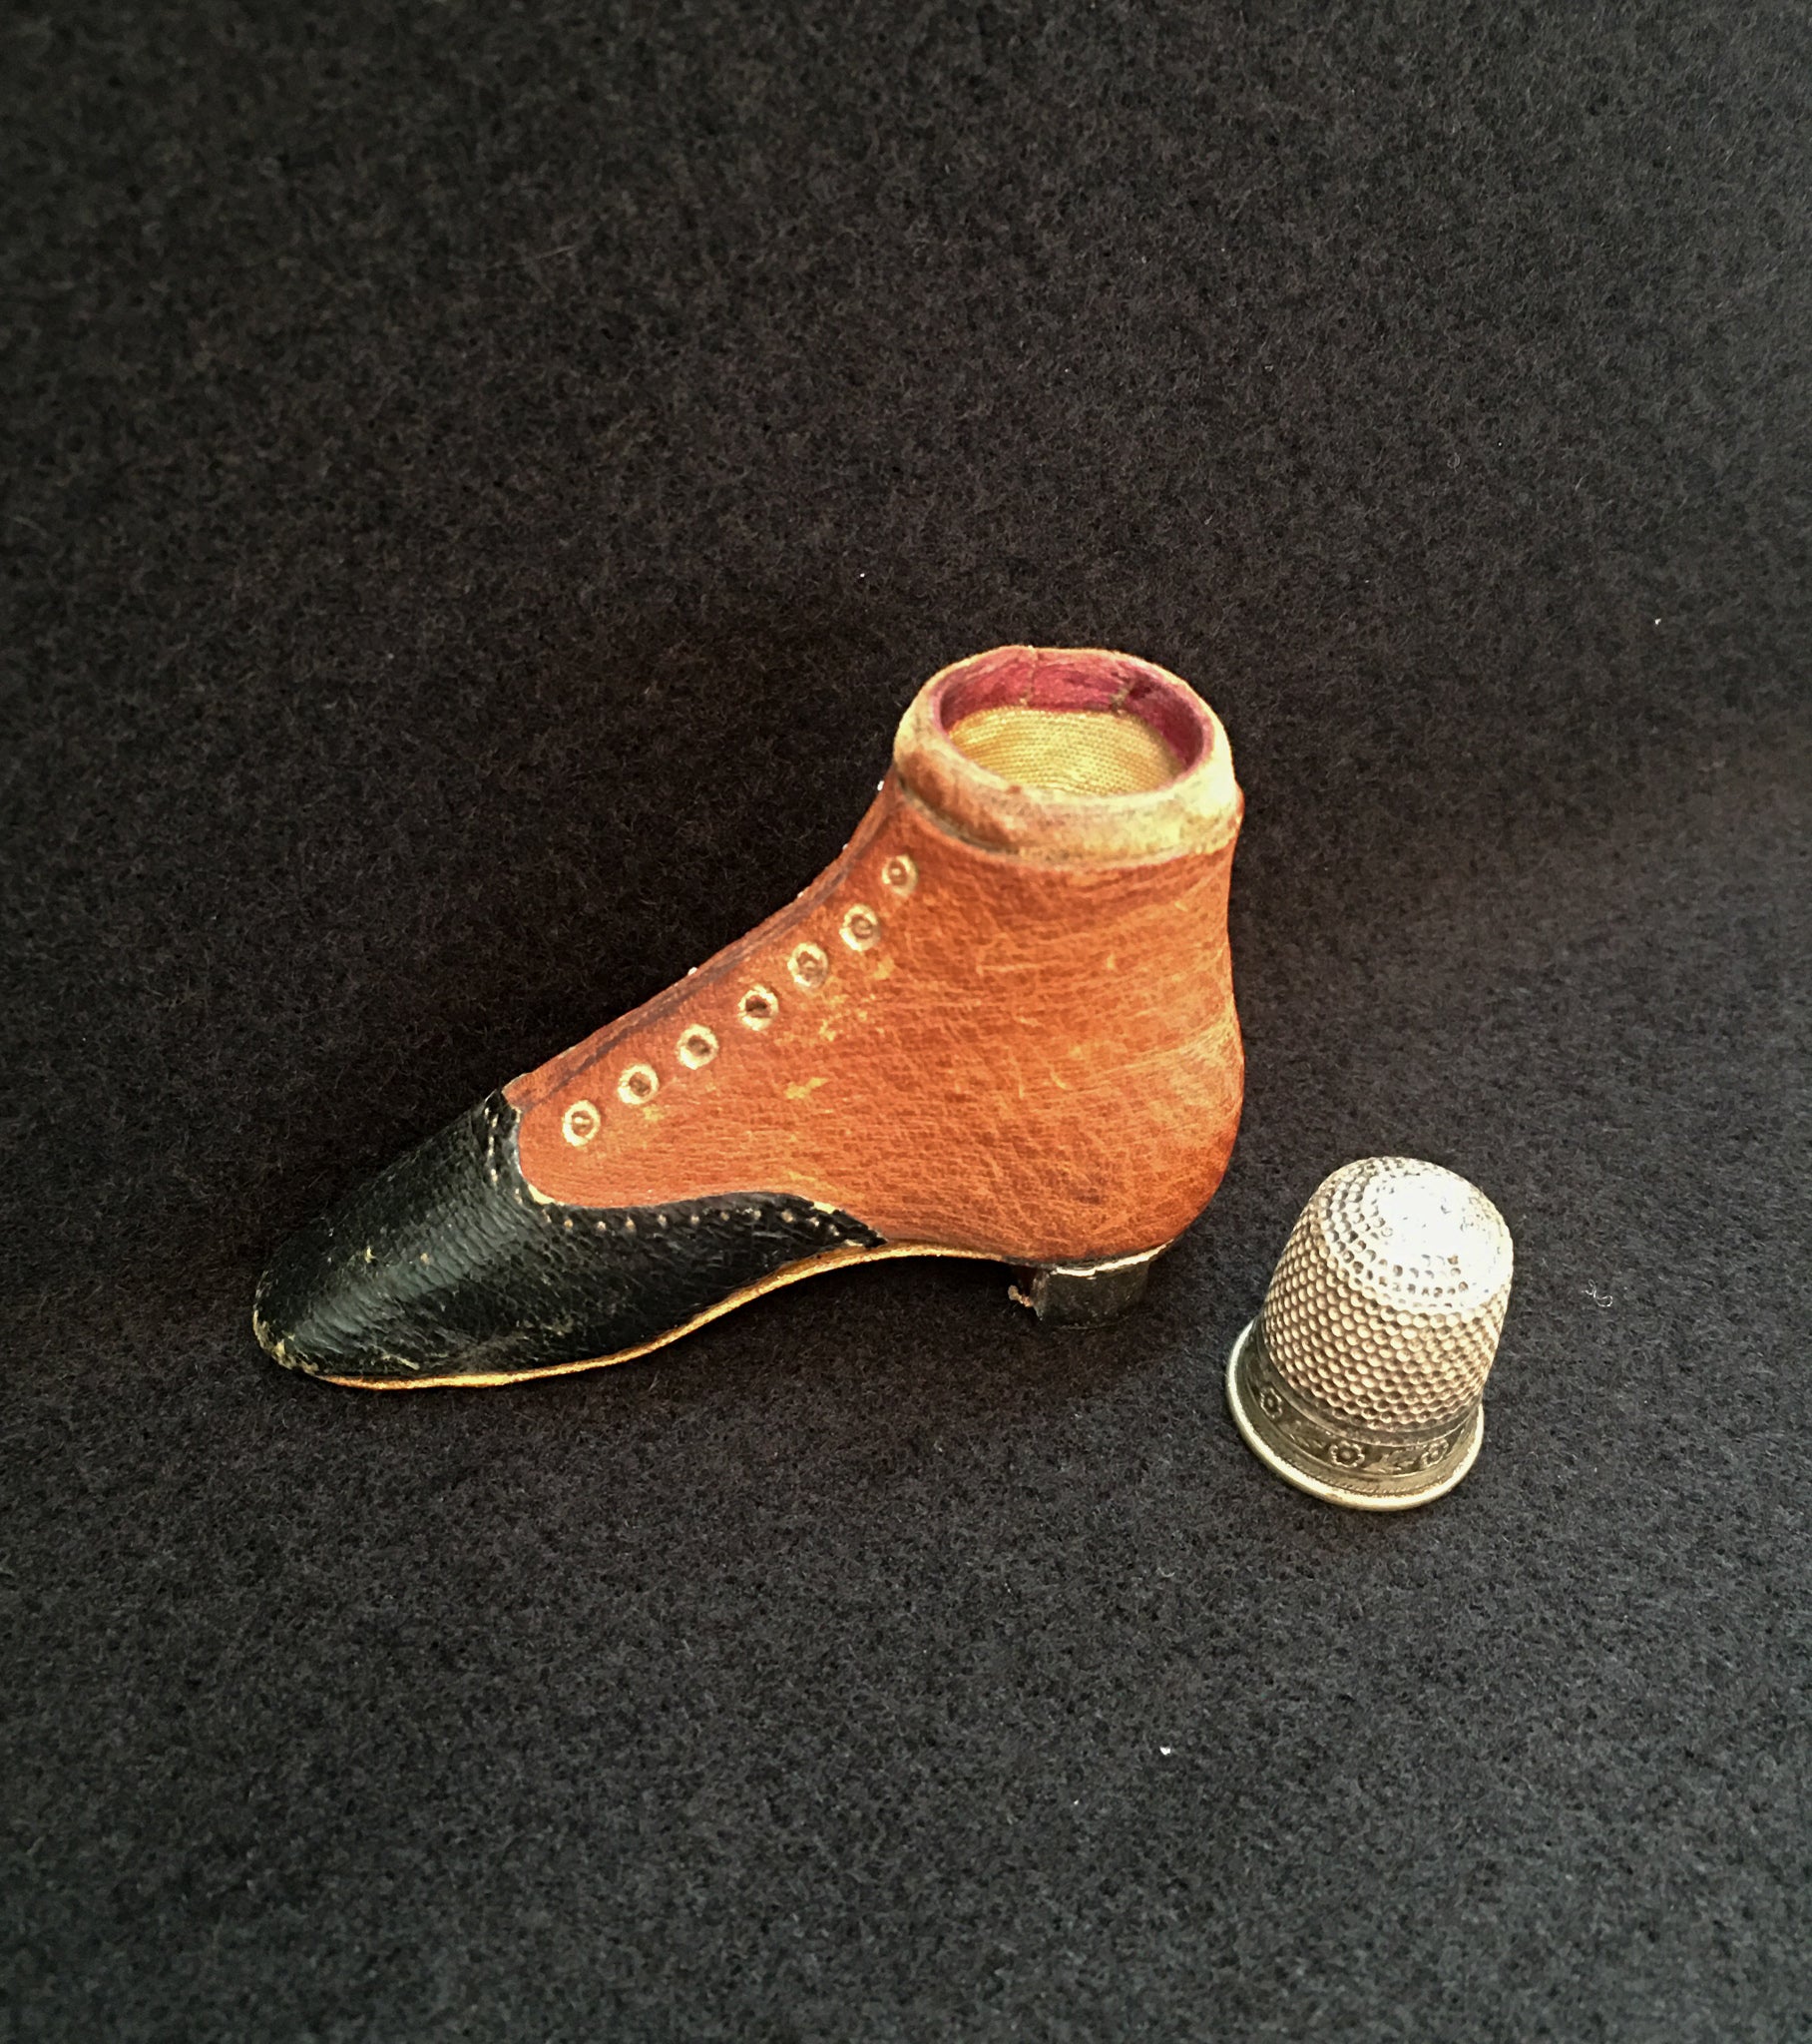 Antique Thimble Holder with Thimble - Leather Lady’s Boot